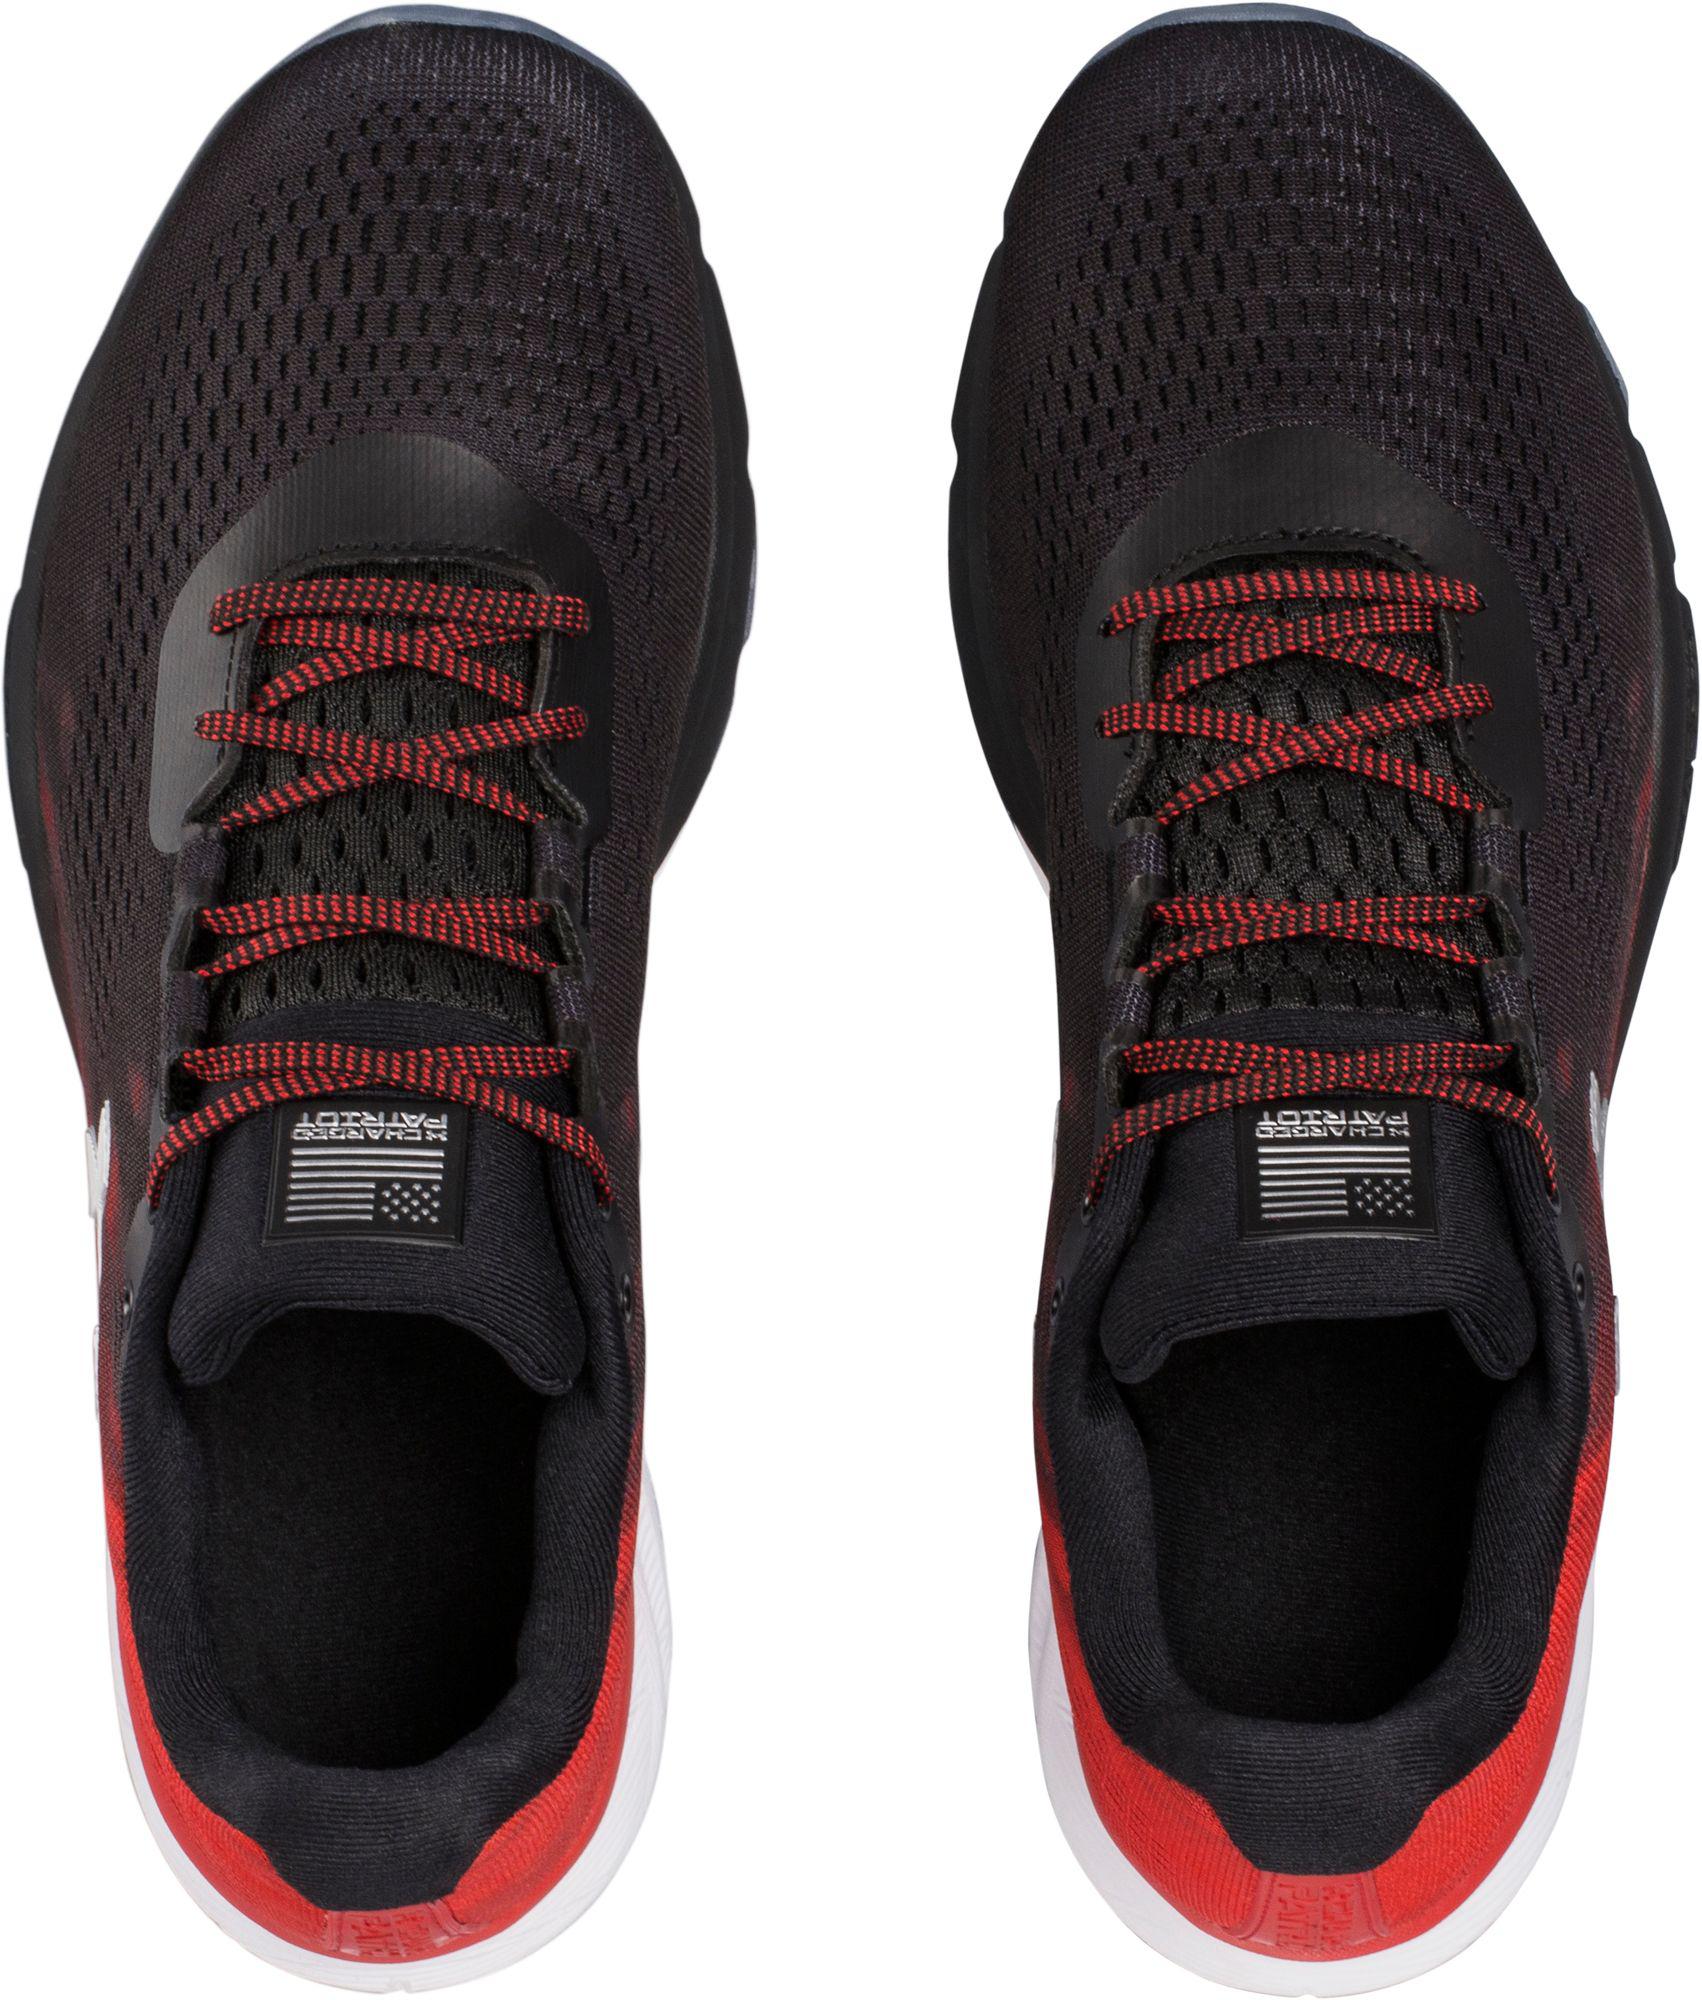 Charged Patriot Running Shoes 